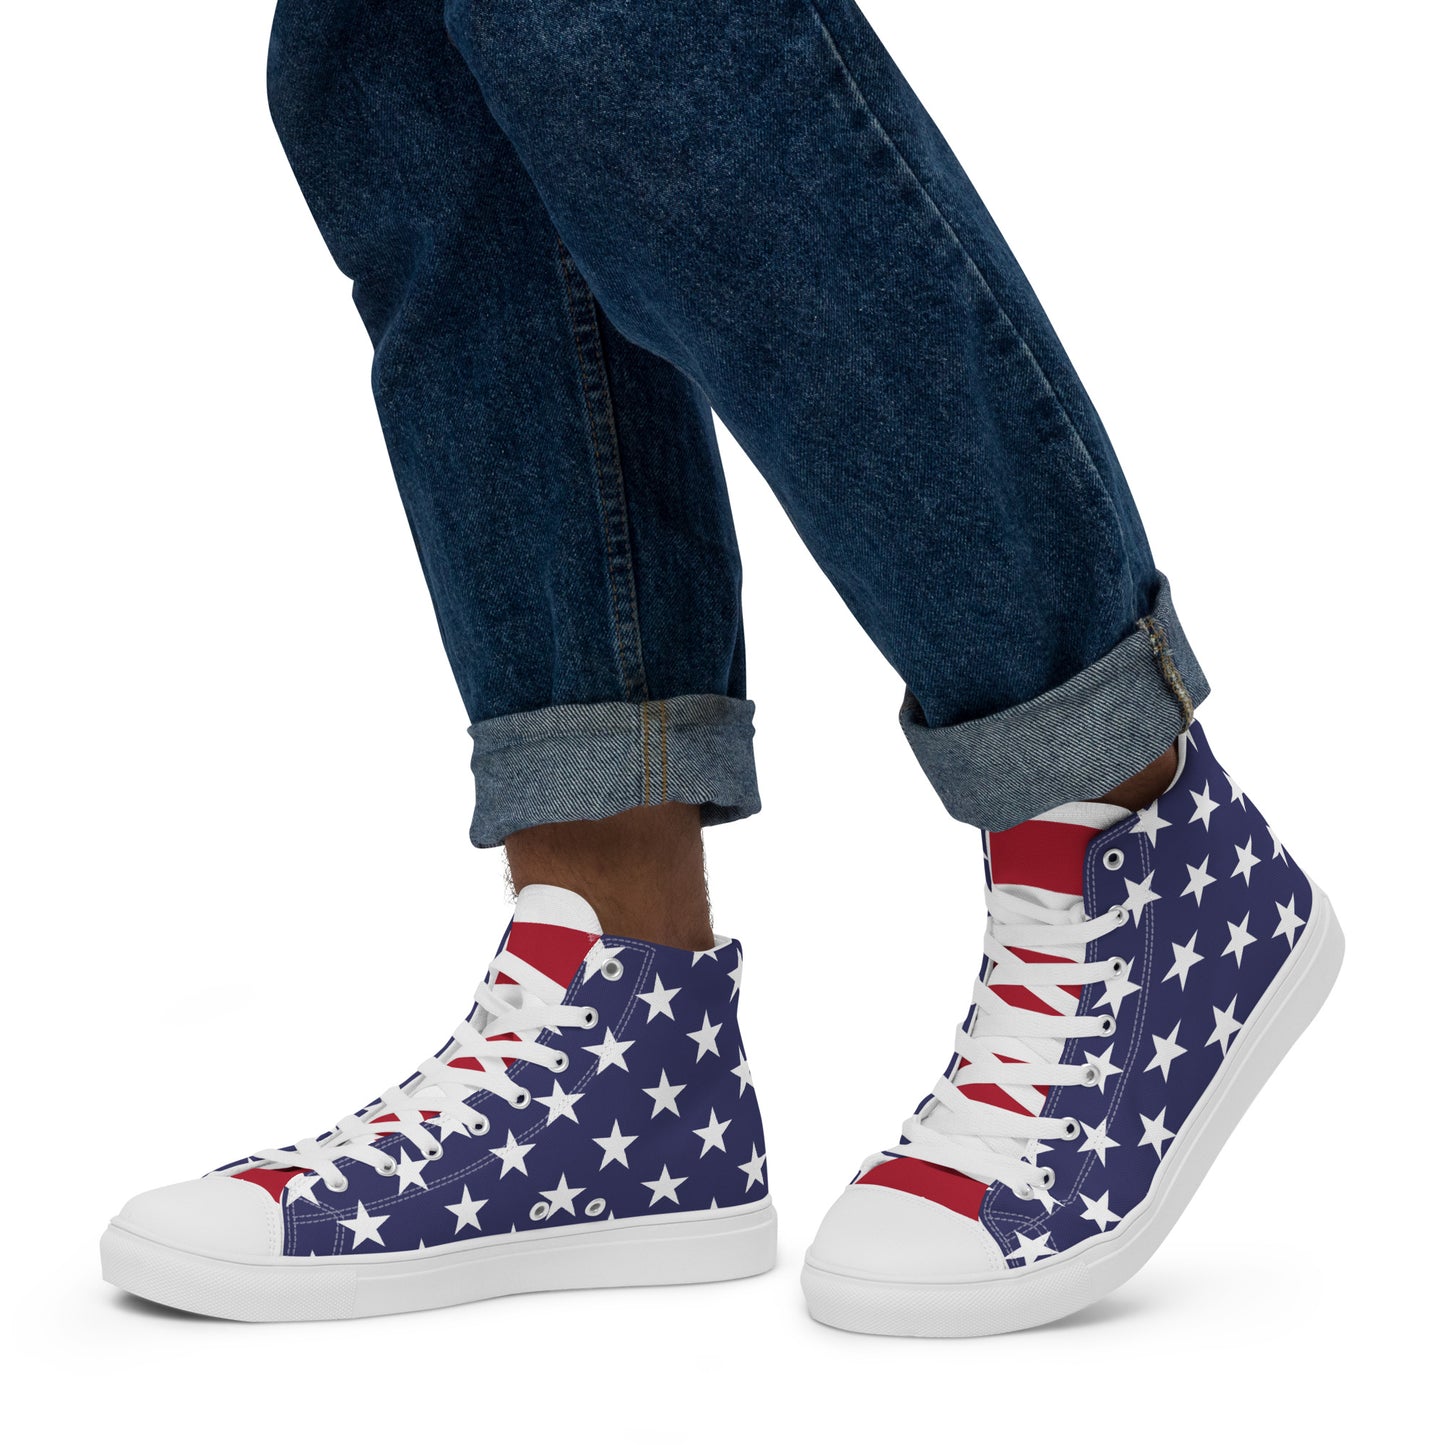 High Top Sneakers For Men With American Flag Print